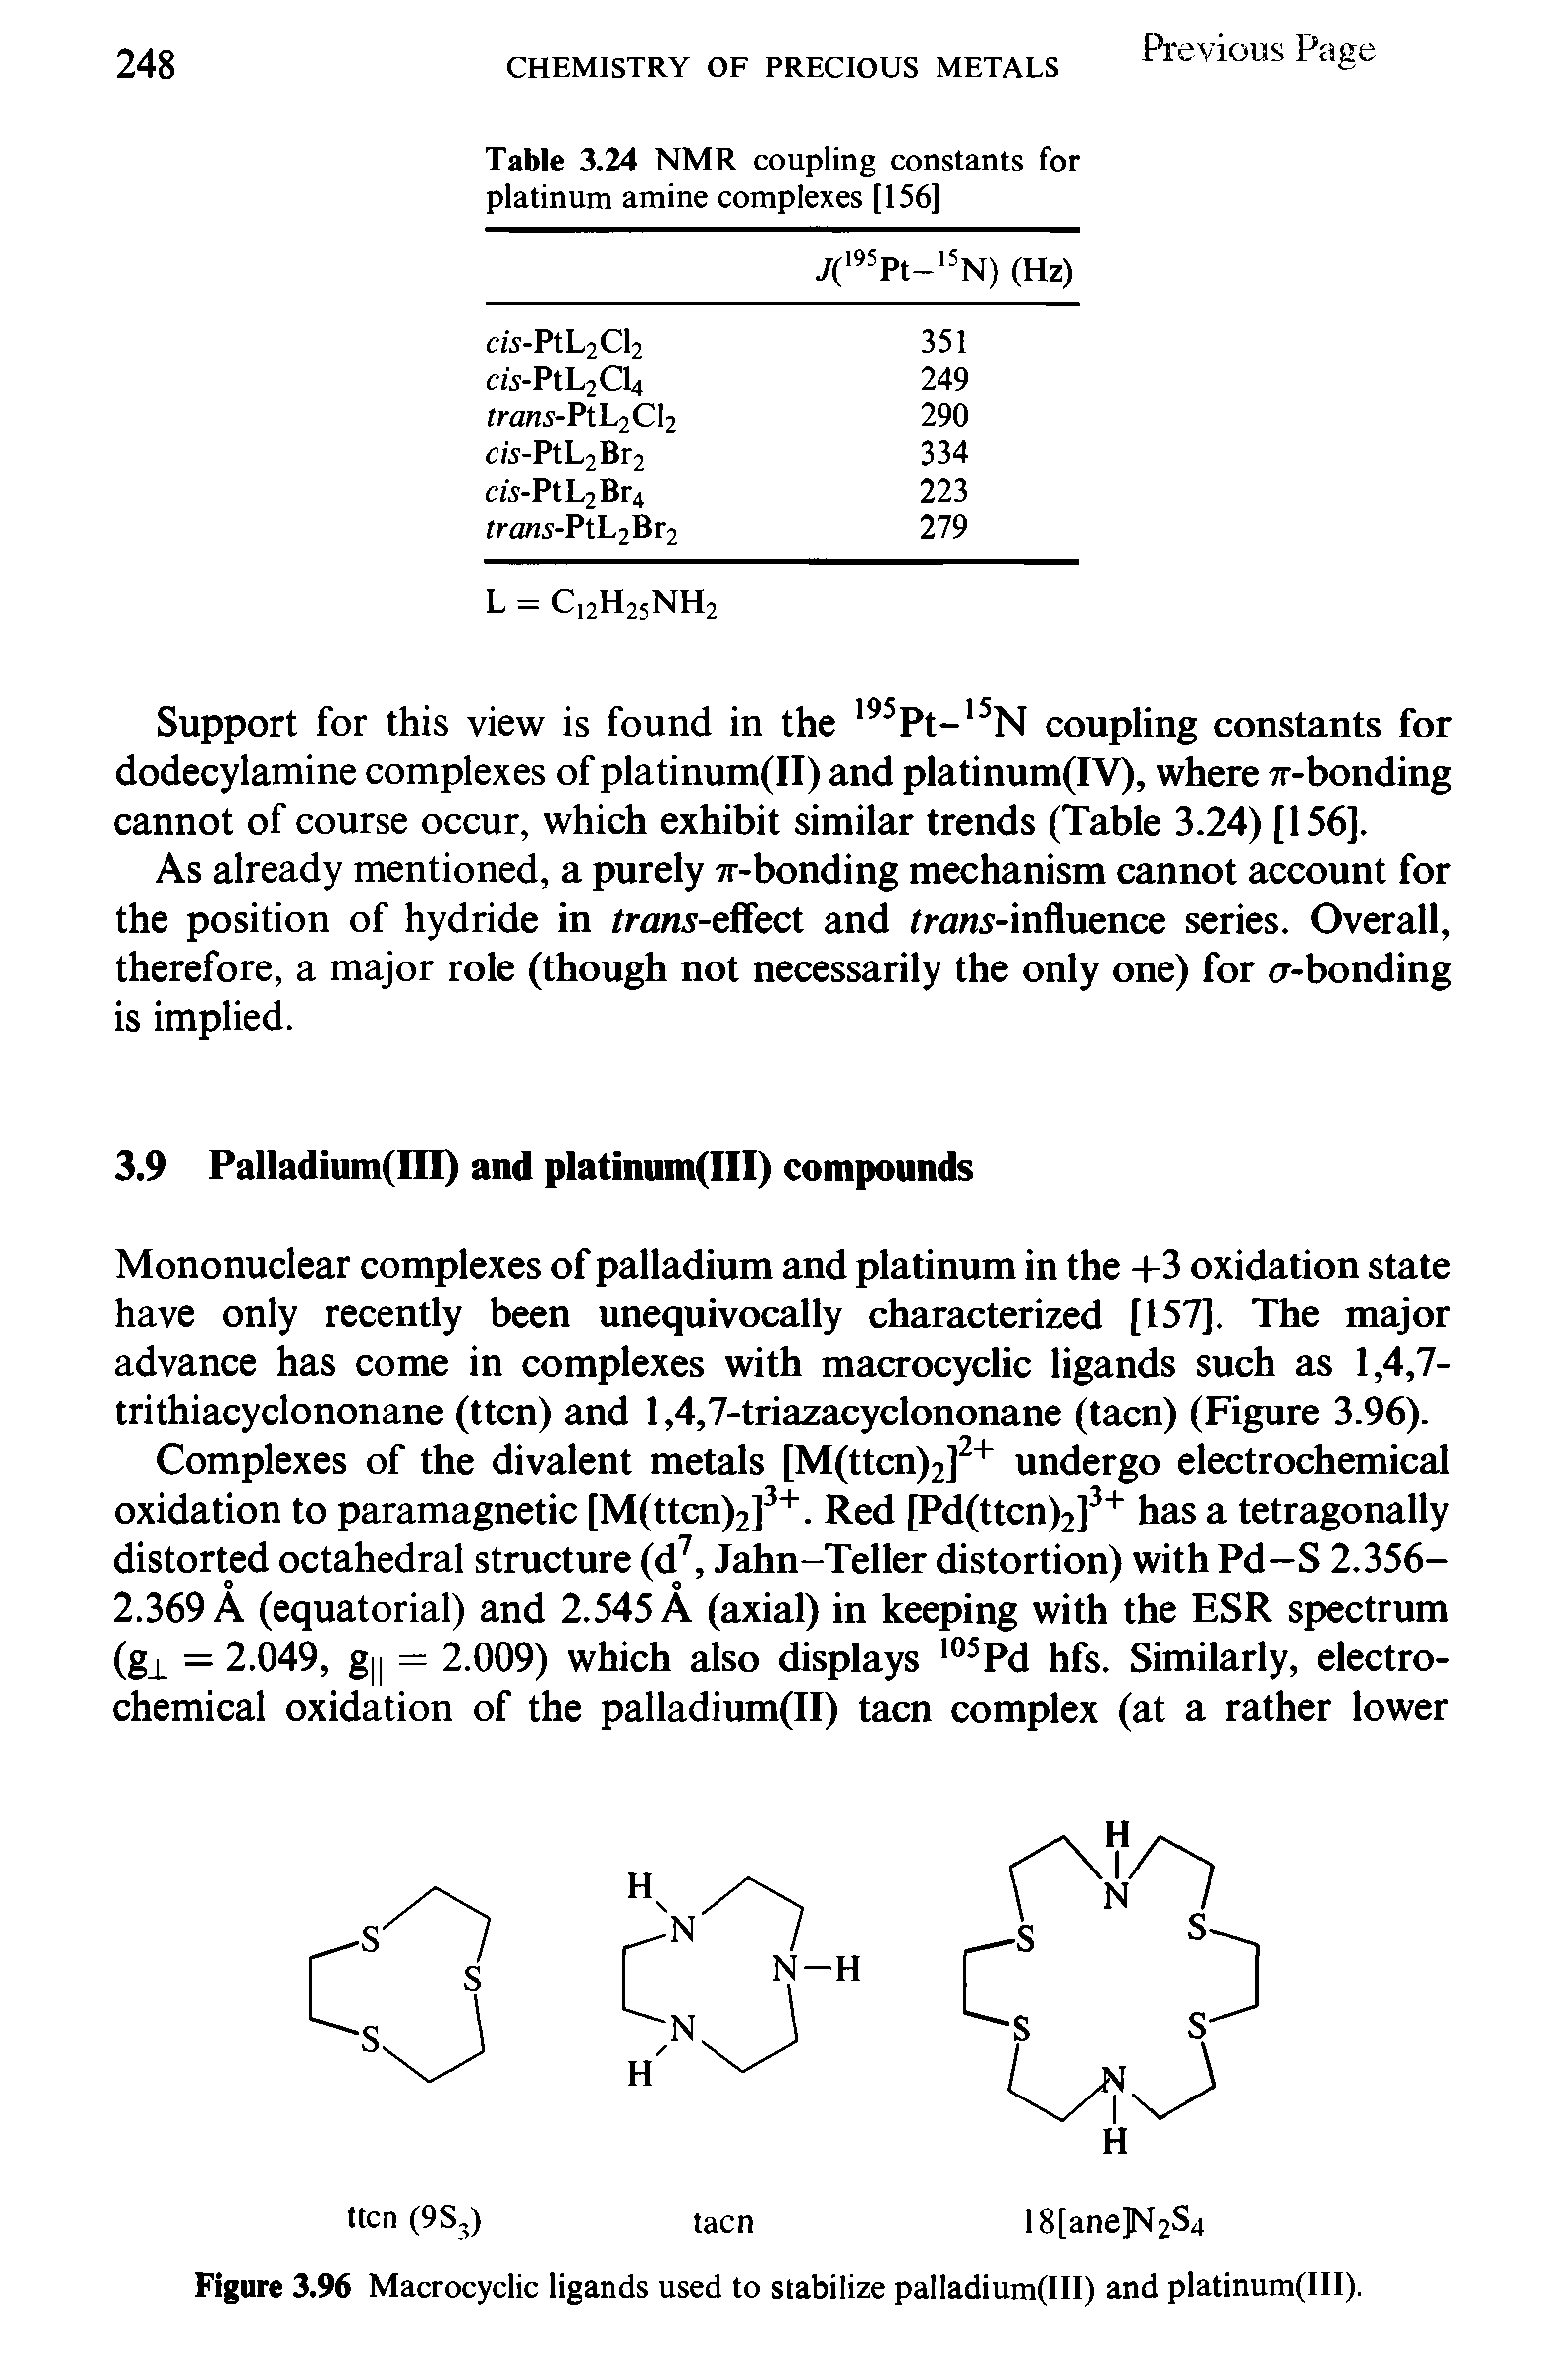 Table 3.24 NMR coupling constants for platinum amine complexes [156]...